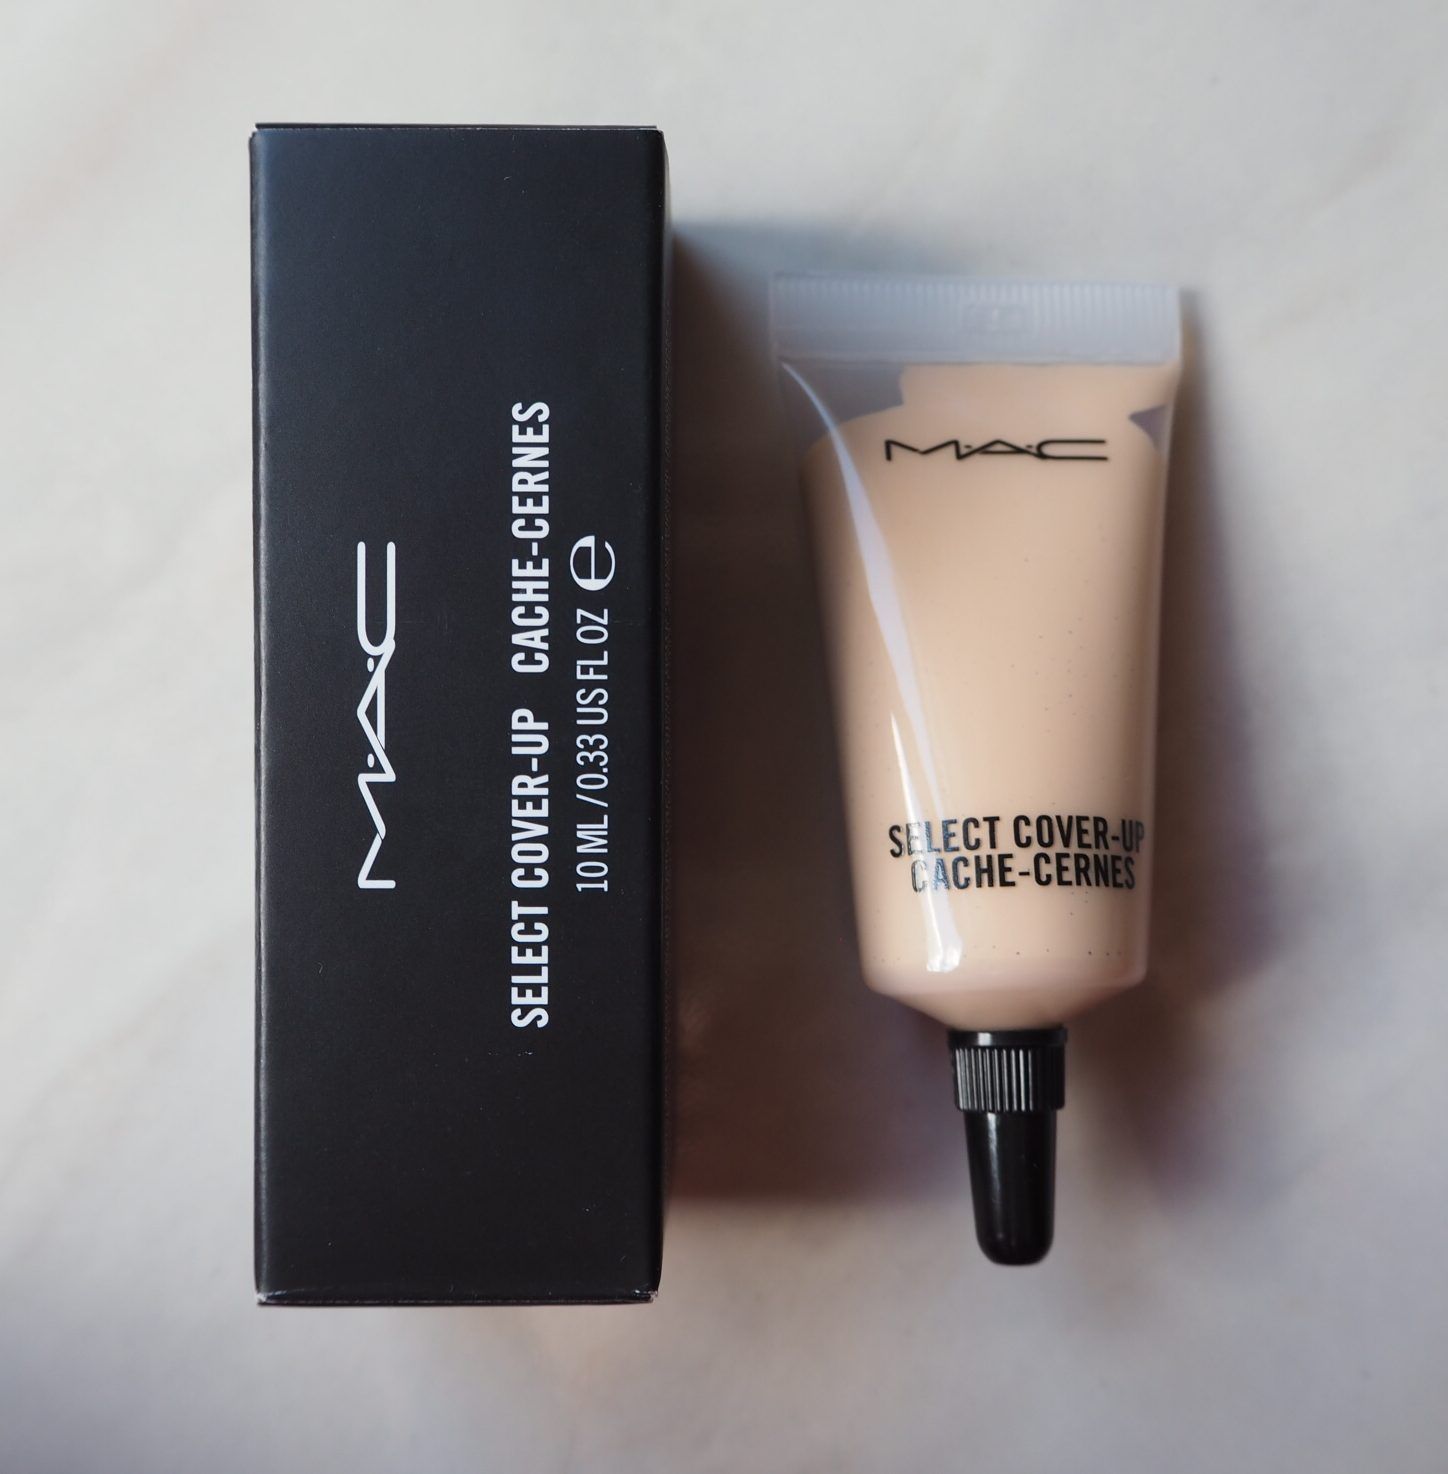 mac concealer select cover up